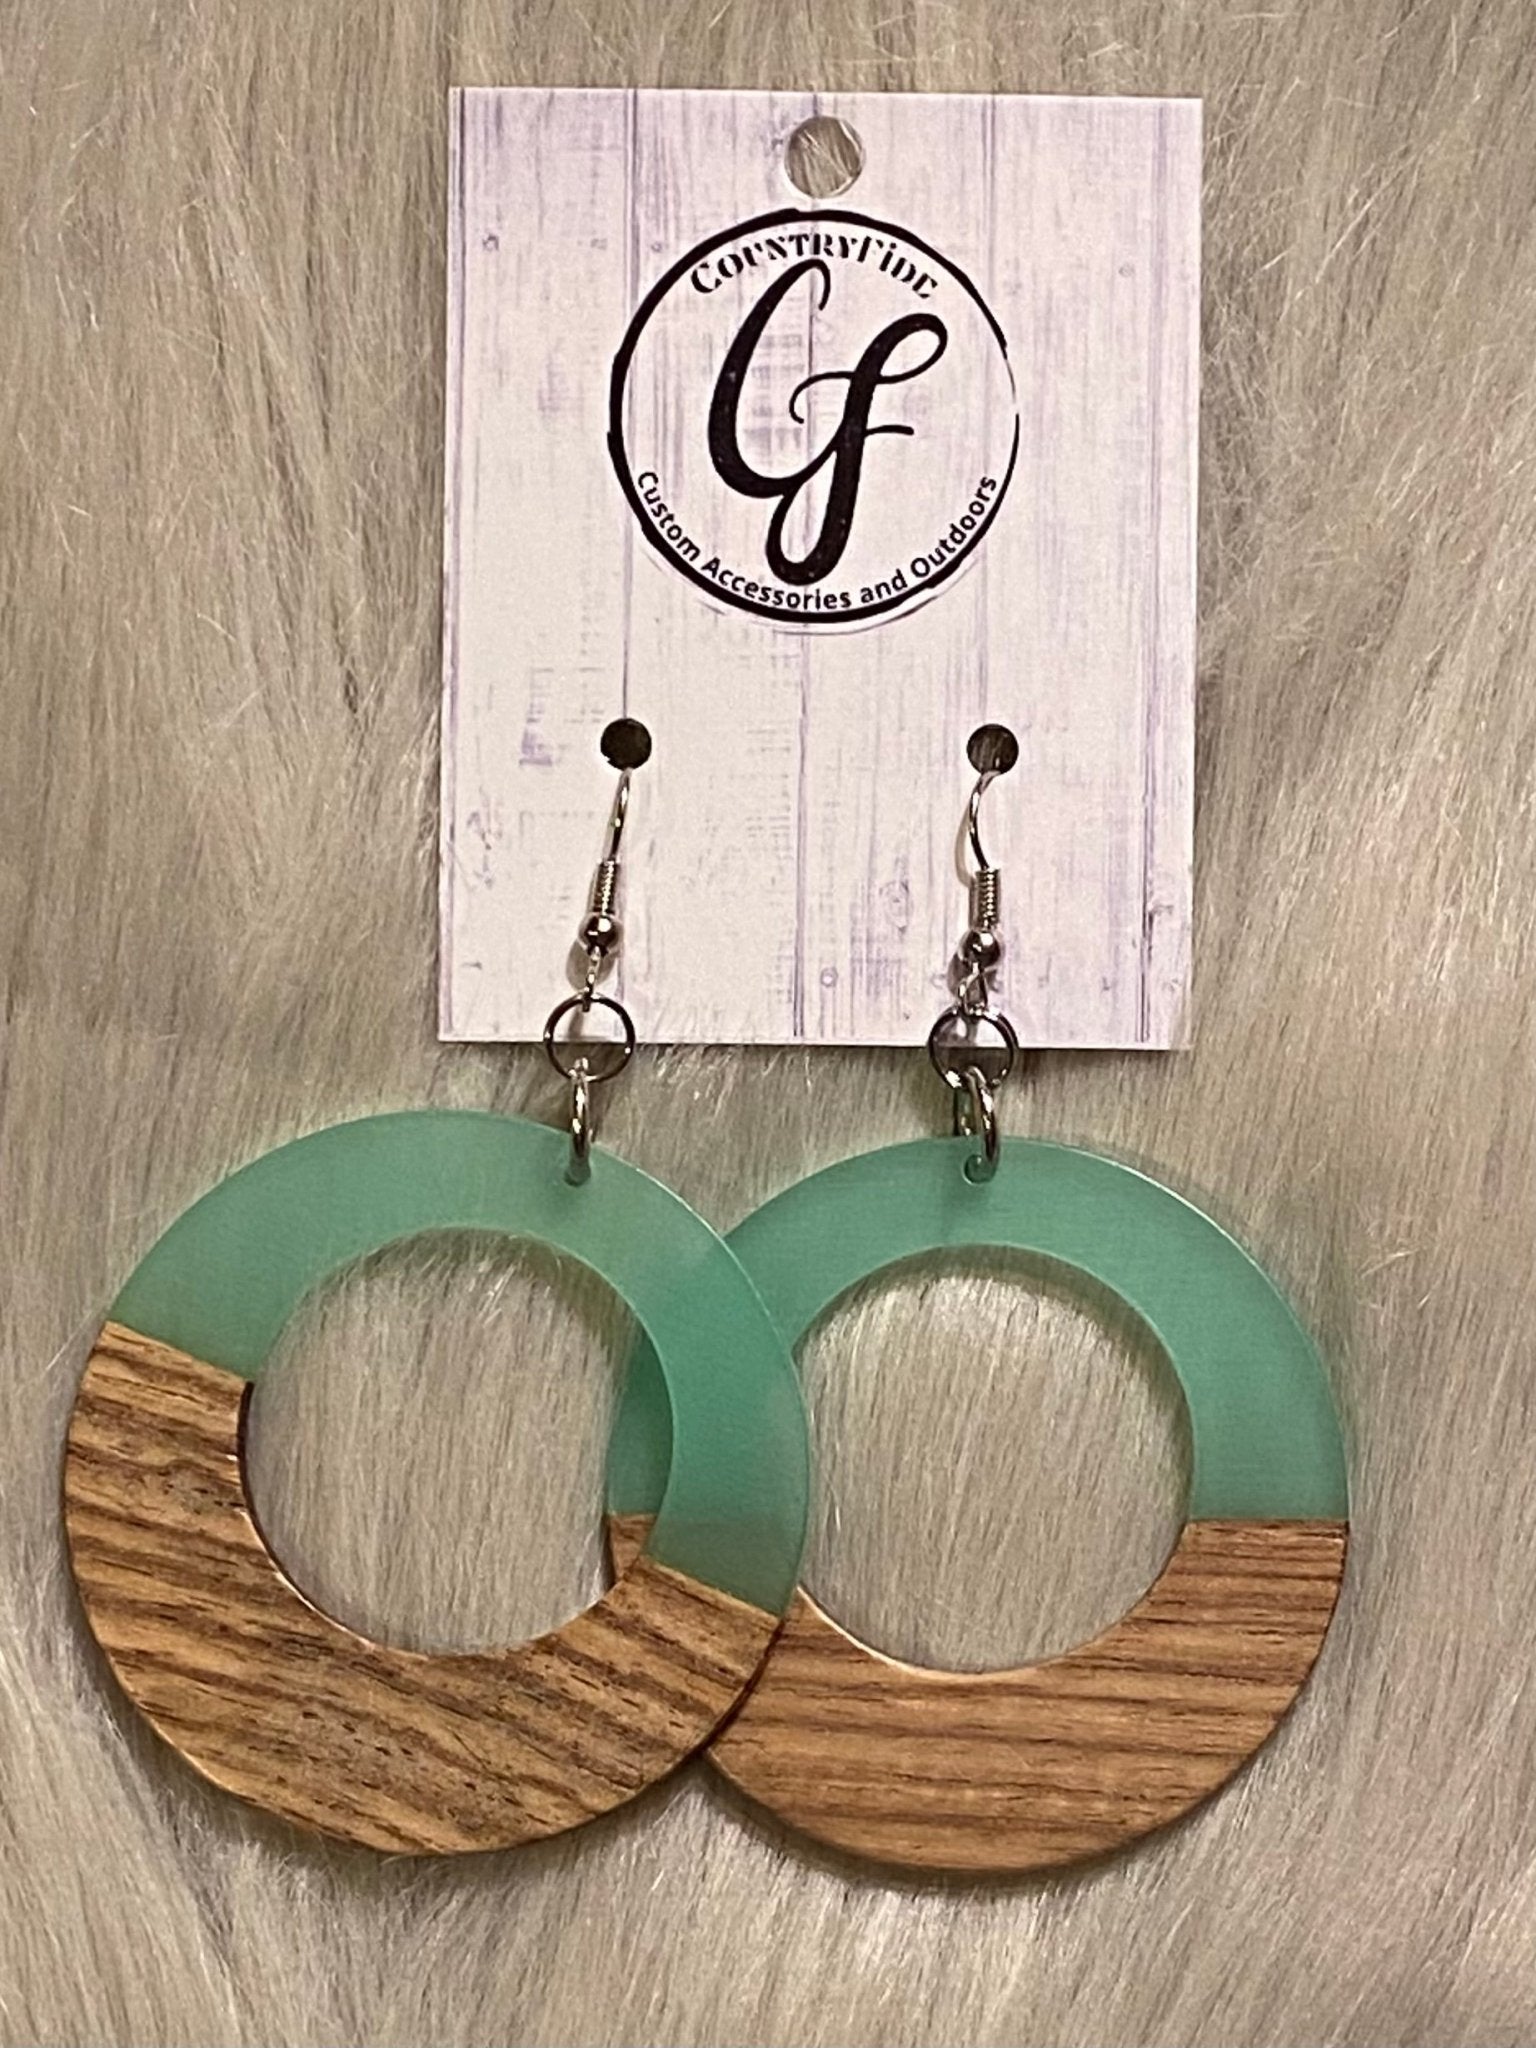 Sea-foam and Wood Circles - CountryFide Custom Accessories and Outdoors